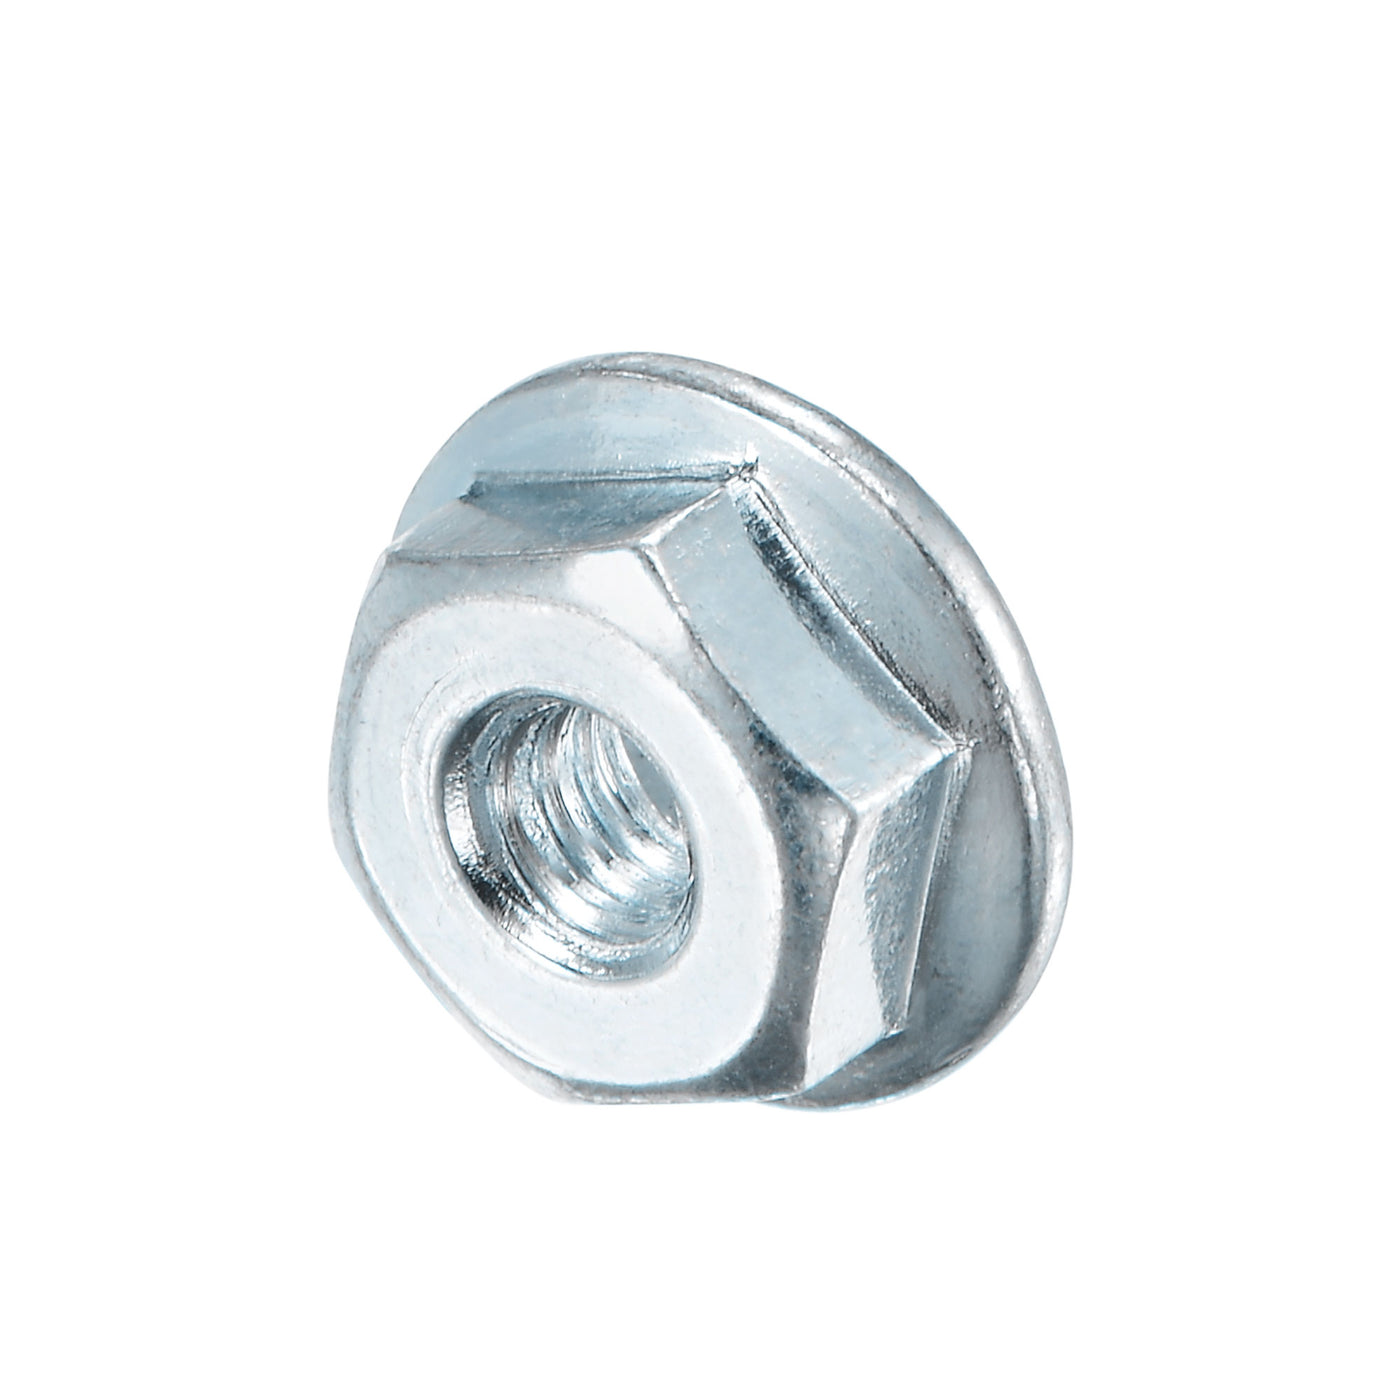 uxcell Uxcell Serrated Flange Hex Lock Nuts, Carbon Steel Zinc Plated Self-locking